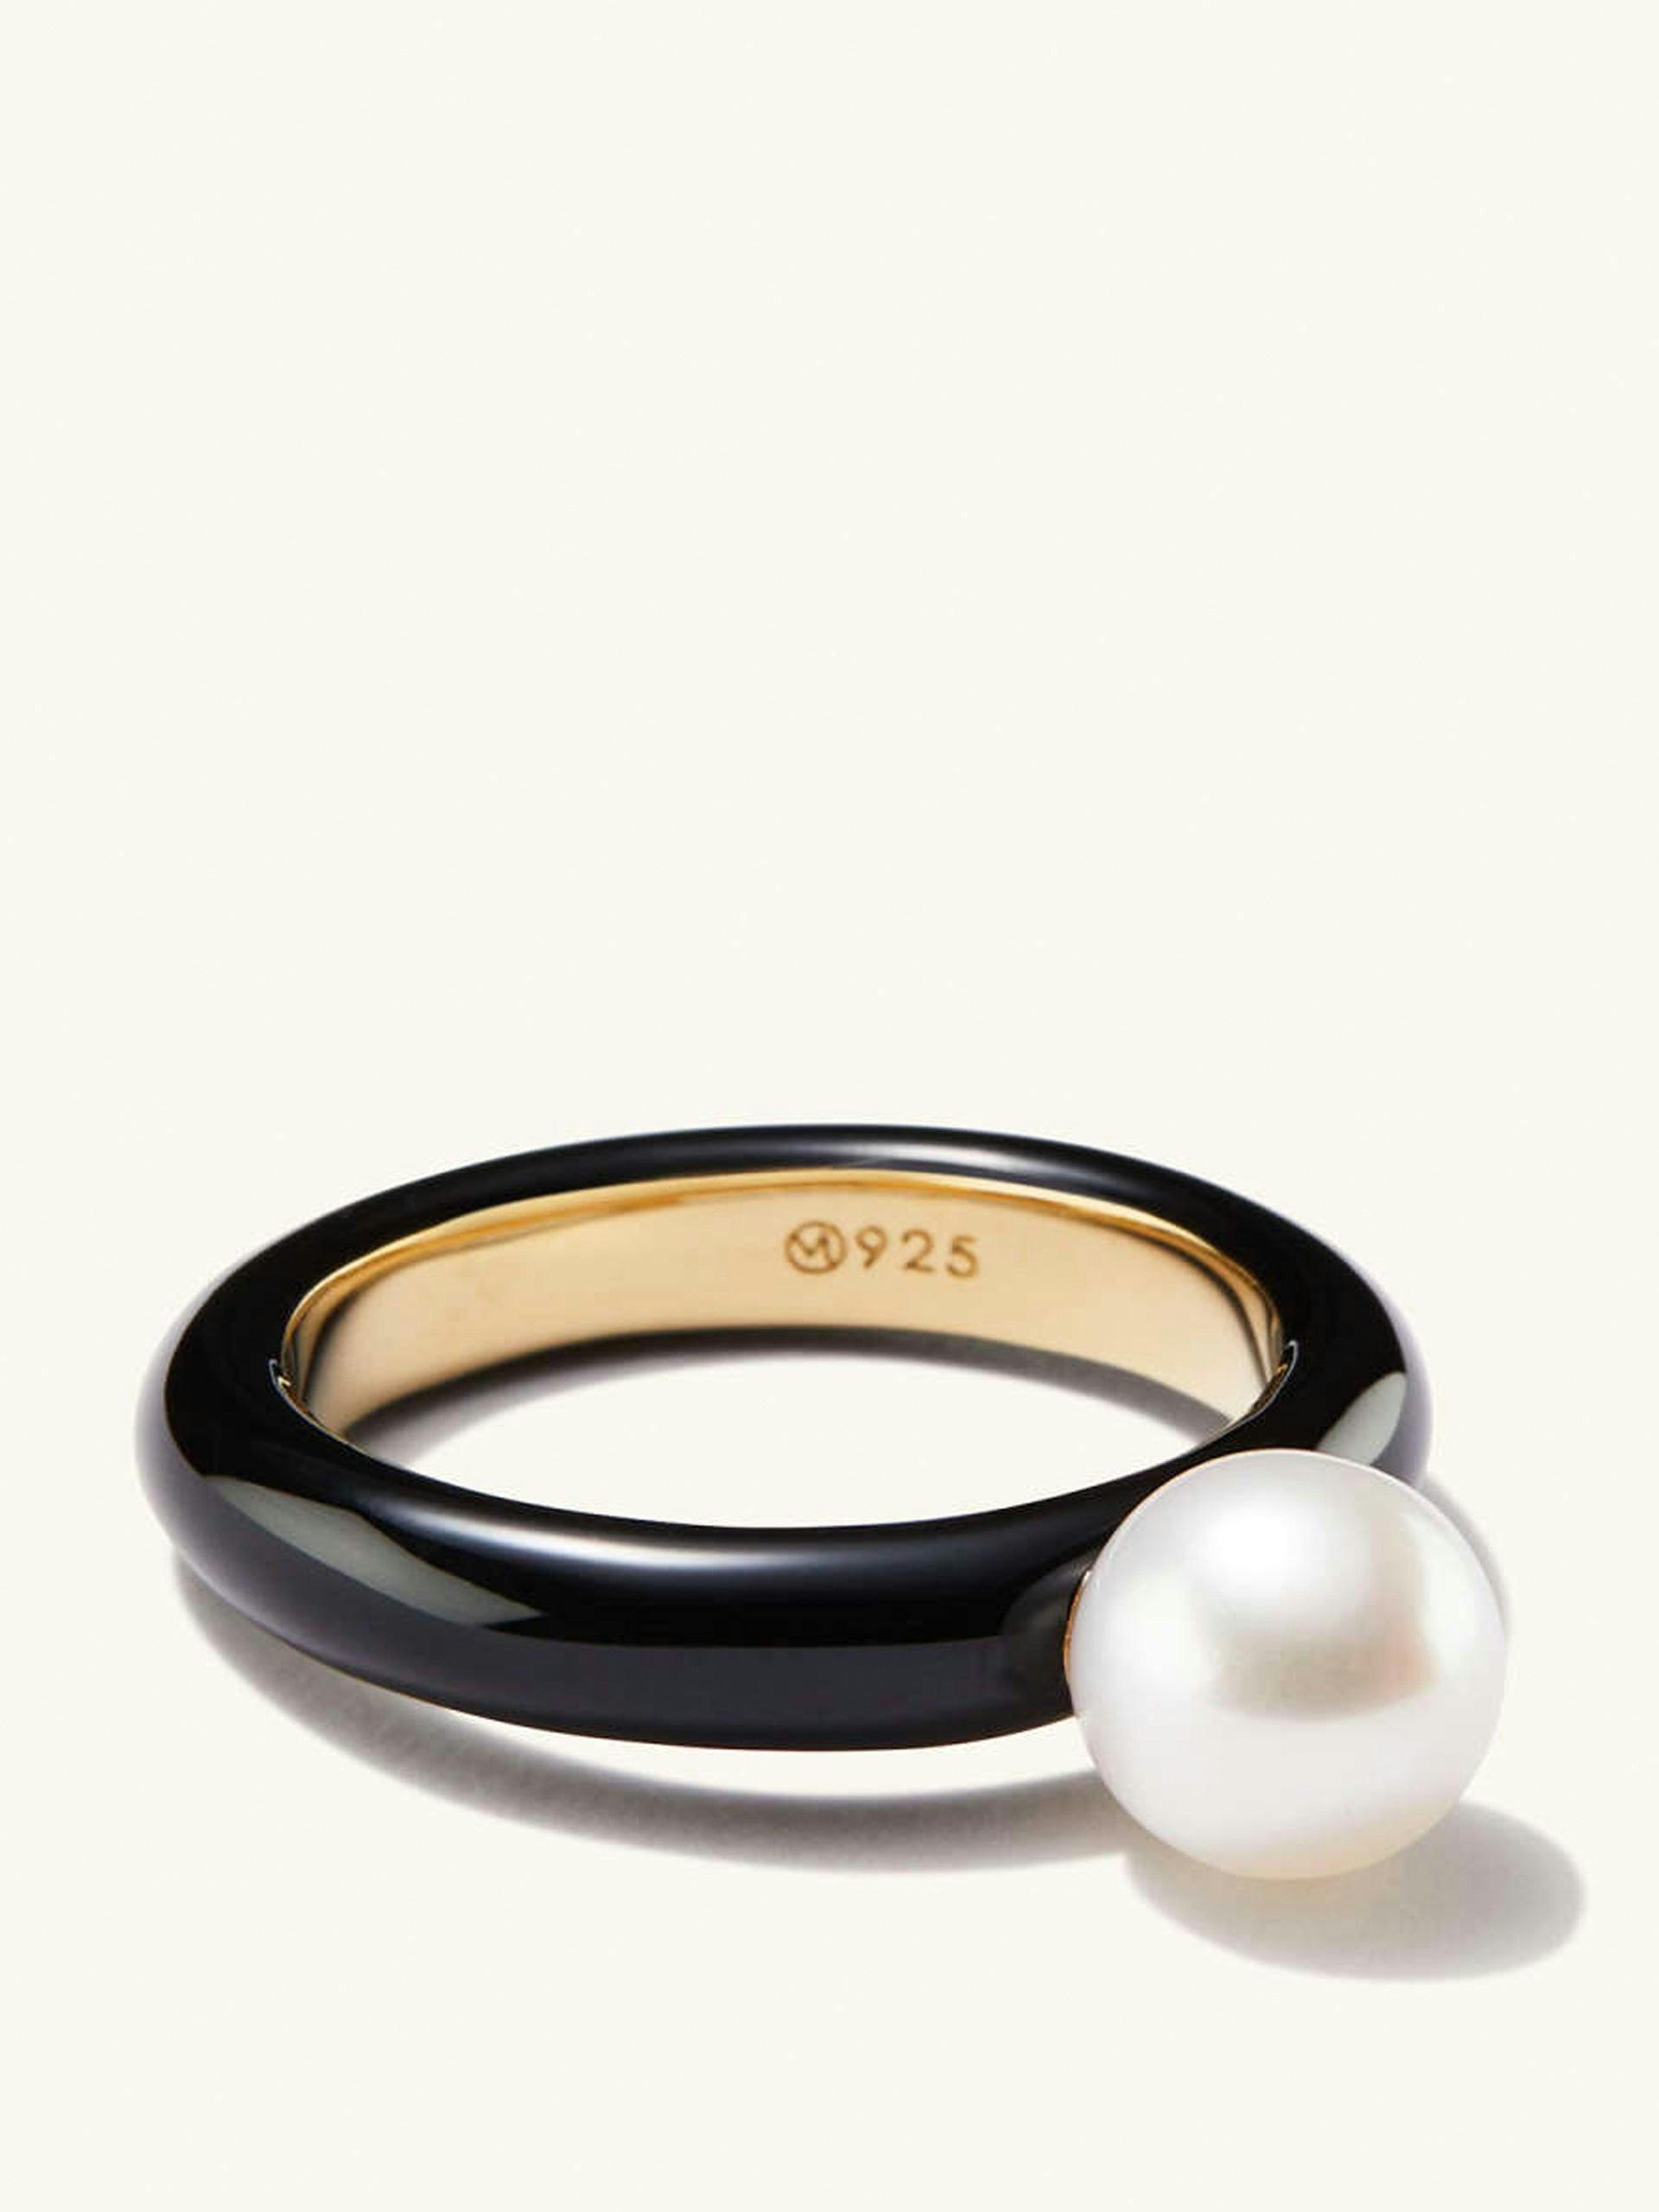 Gumball pearl ring